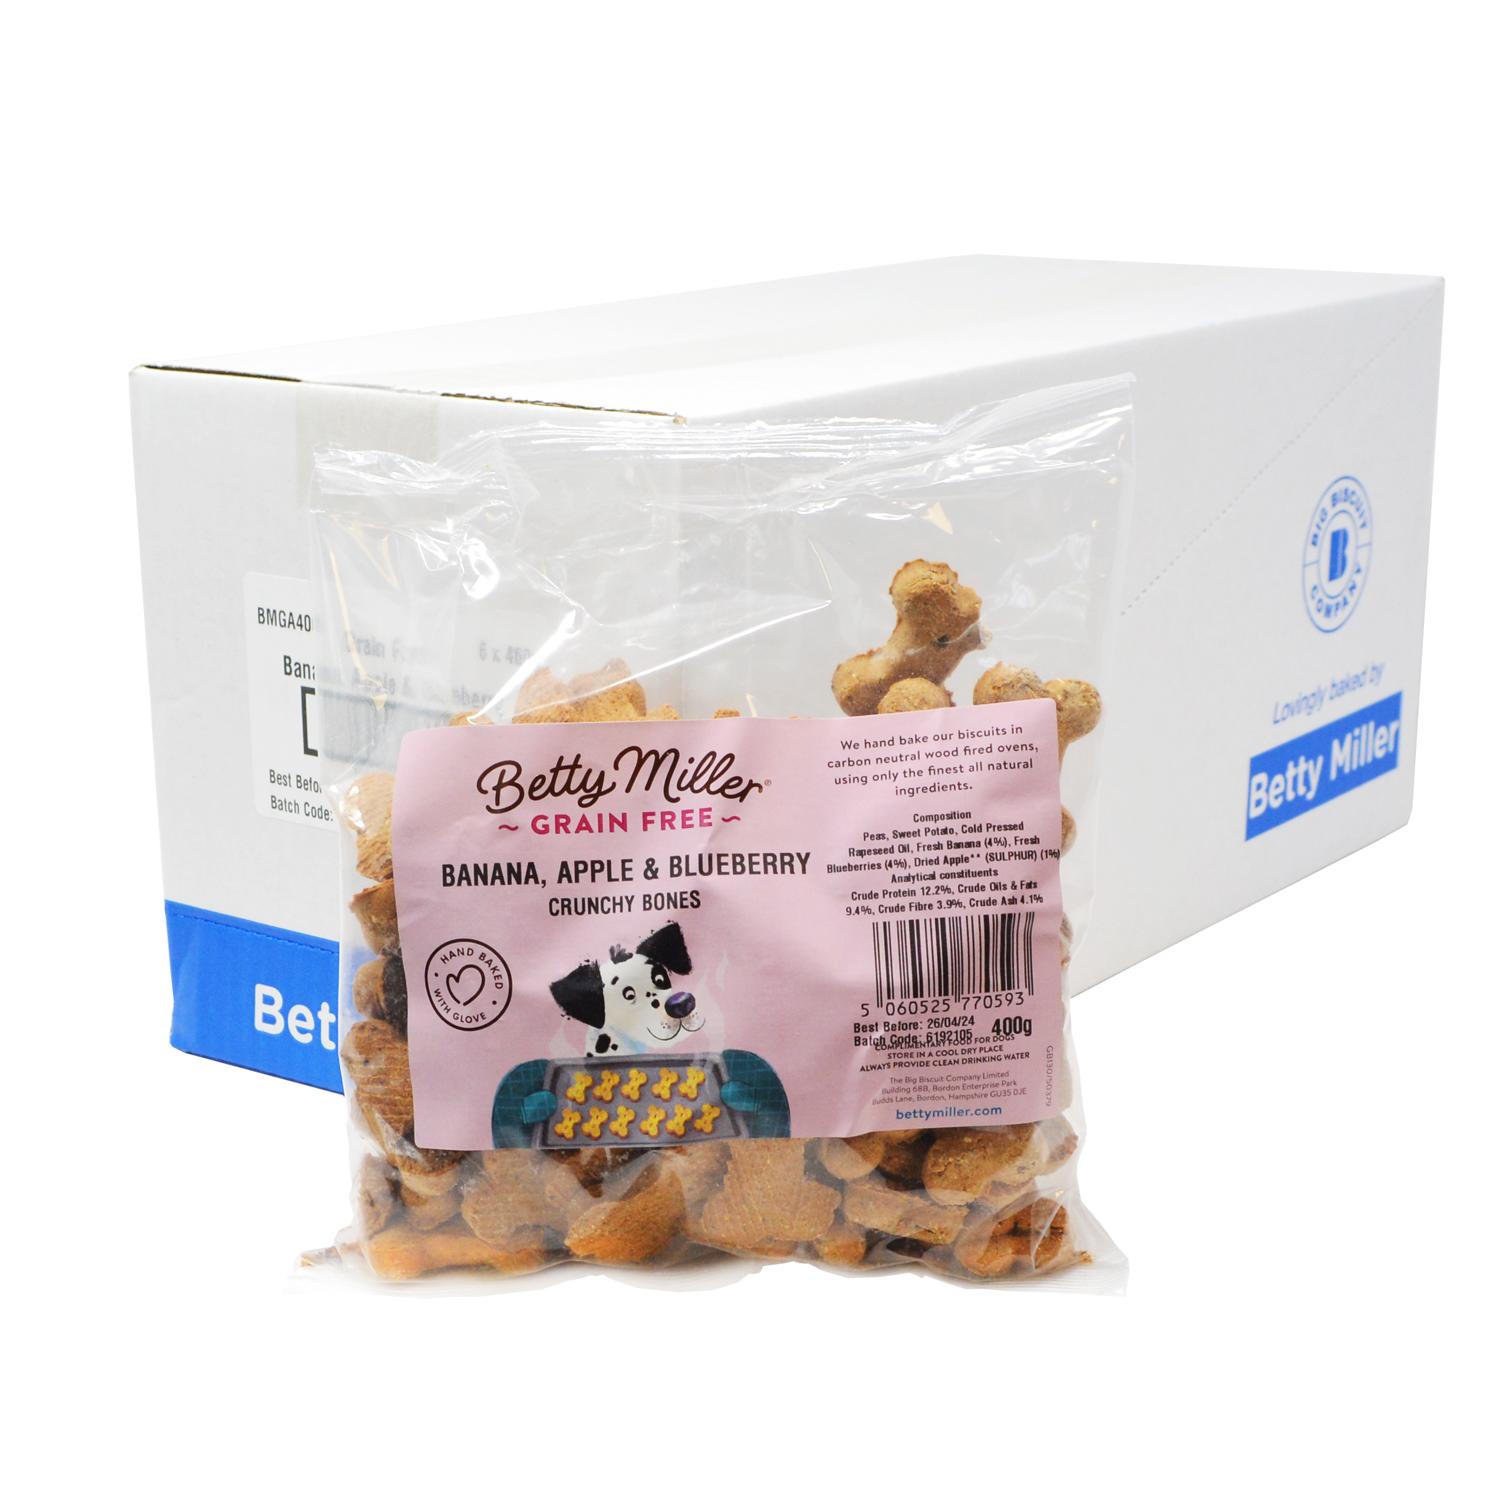 A bulk box of Betty Miller Banana Apple and Blueberry Grain Free Vegan Dog biscuits